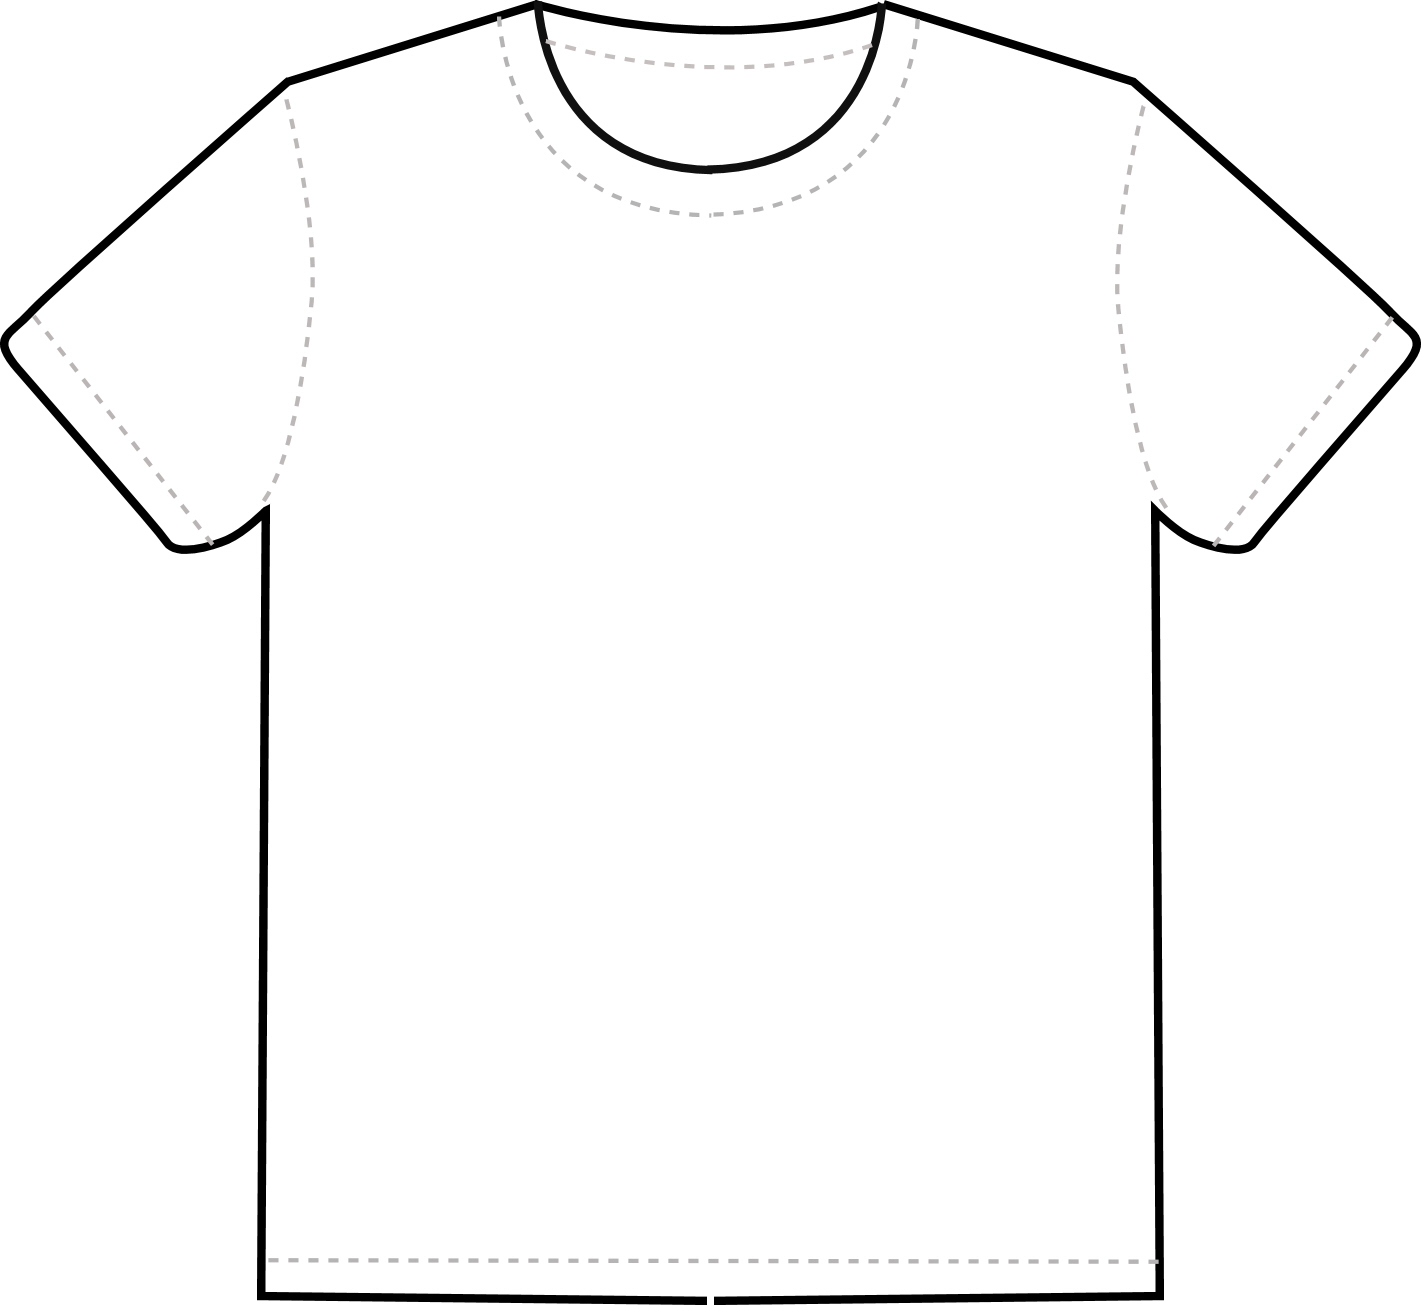 Free Printable T Shirt Template, Download Free Clip Art Throughout Blank Tshirt Template Printable